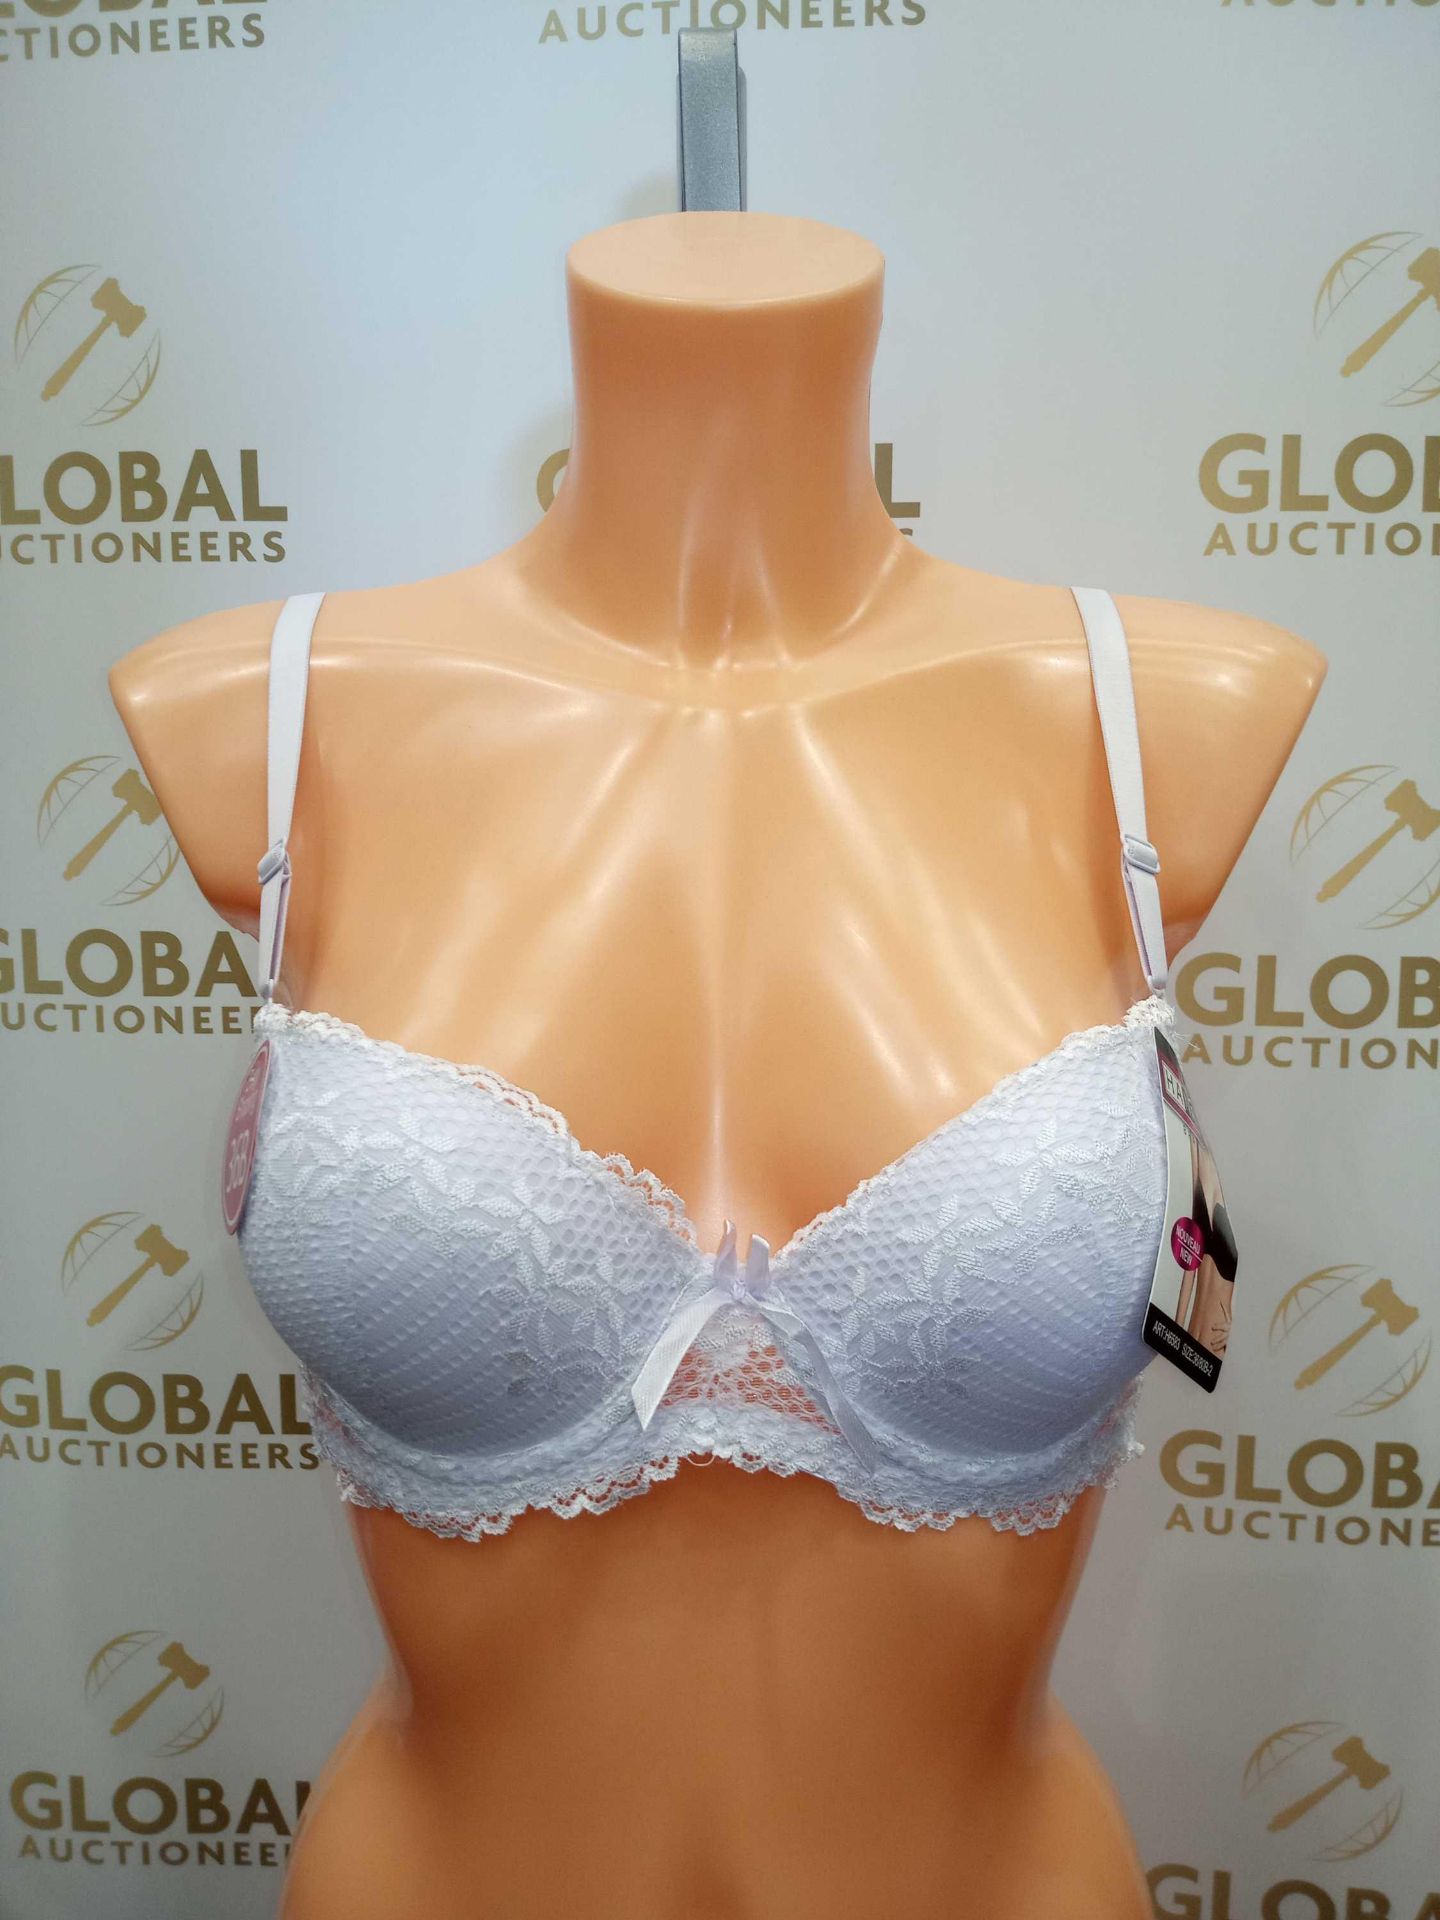 Rrp £270 Lot To Contain 3 Brand New Packs Of 6 Hana Body Shaping Lace Bras (White)